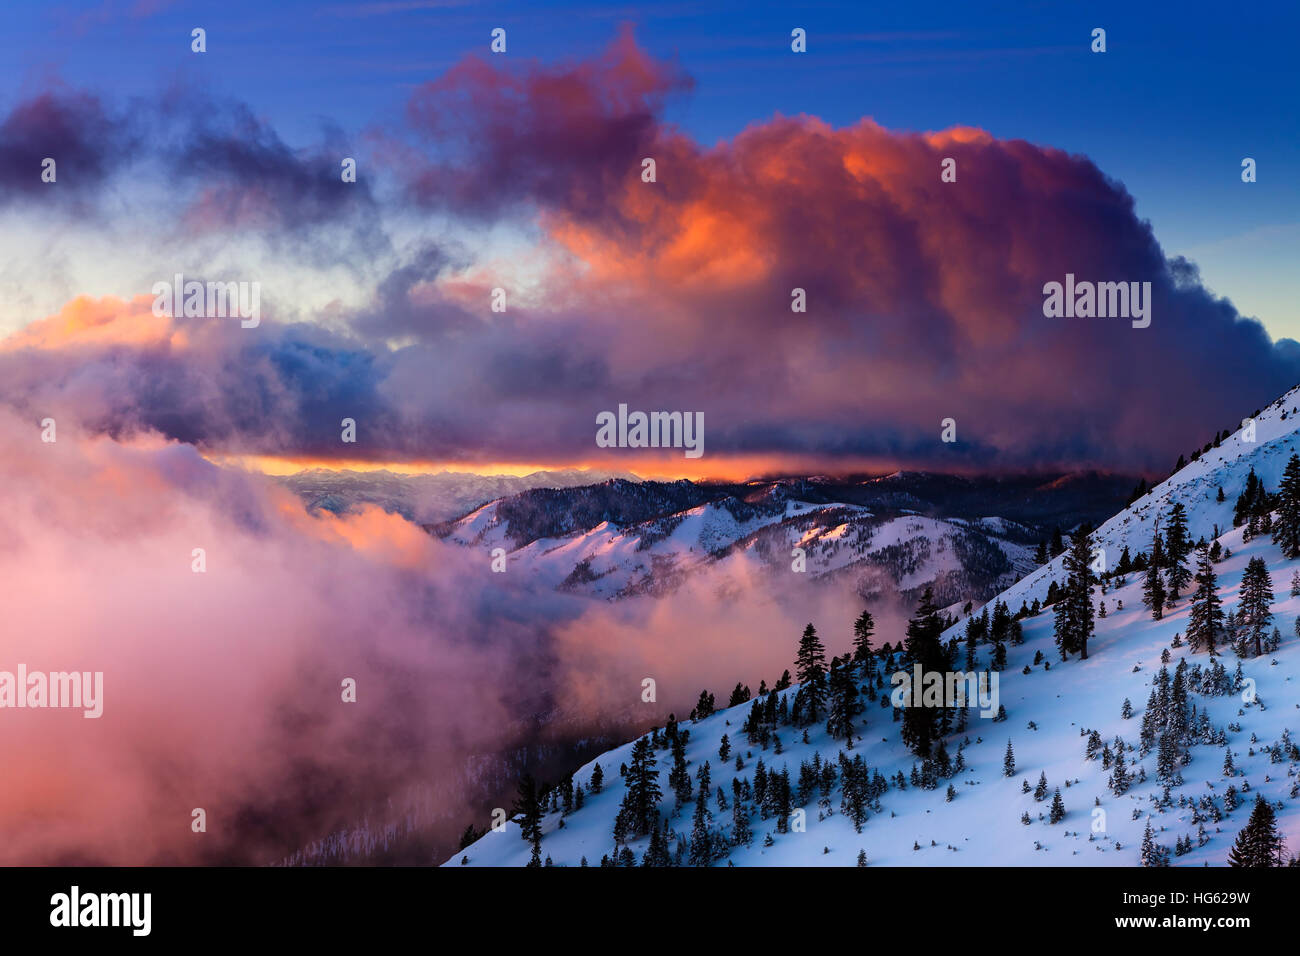 Sunrise in winter on Slide Mountain near Reno, NV on the Mt. Rose Highway. Colorful clouds and snowy landscape. Stock Photo